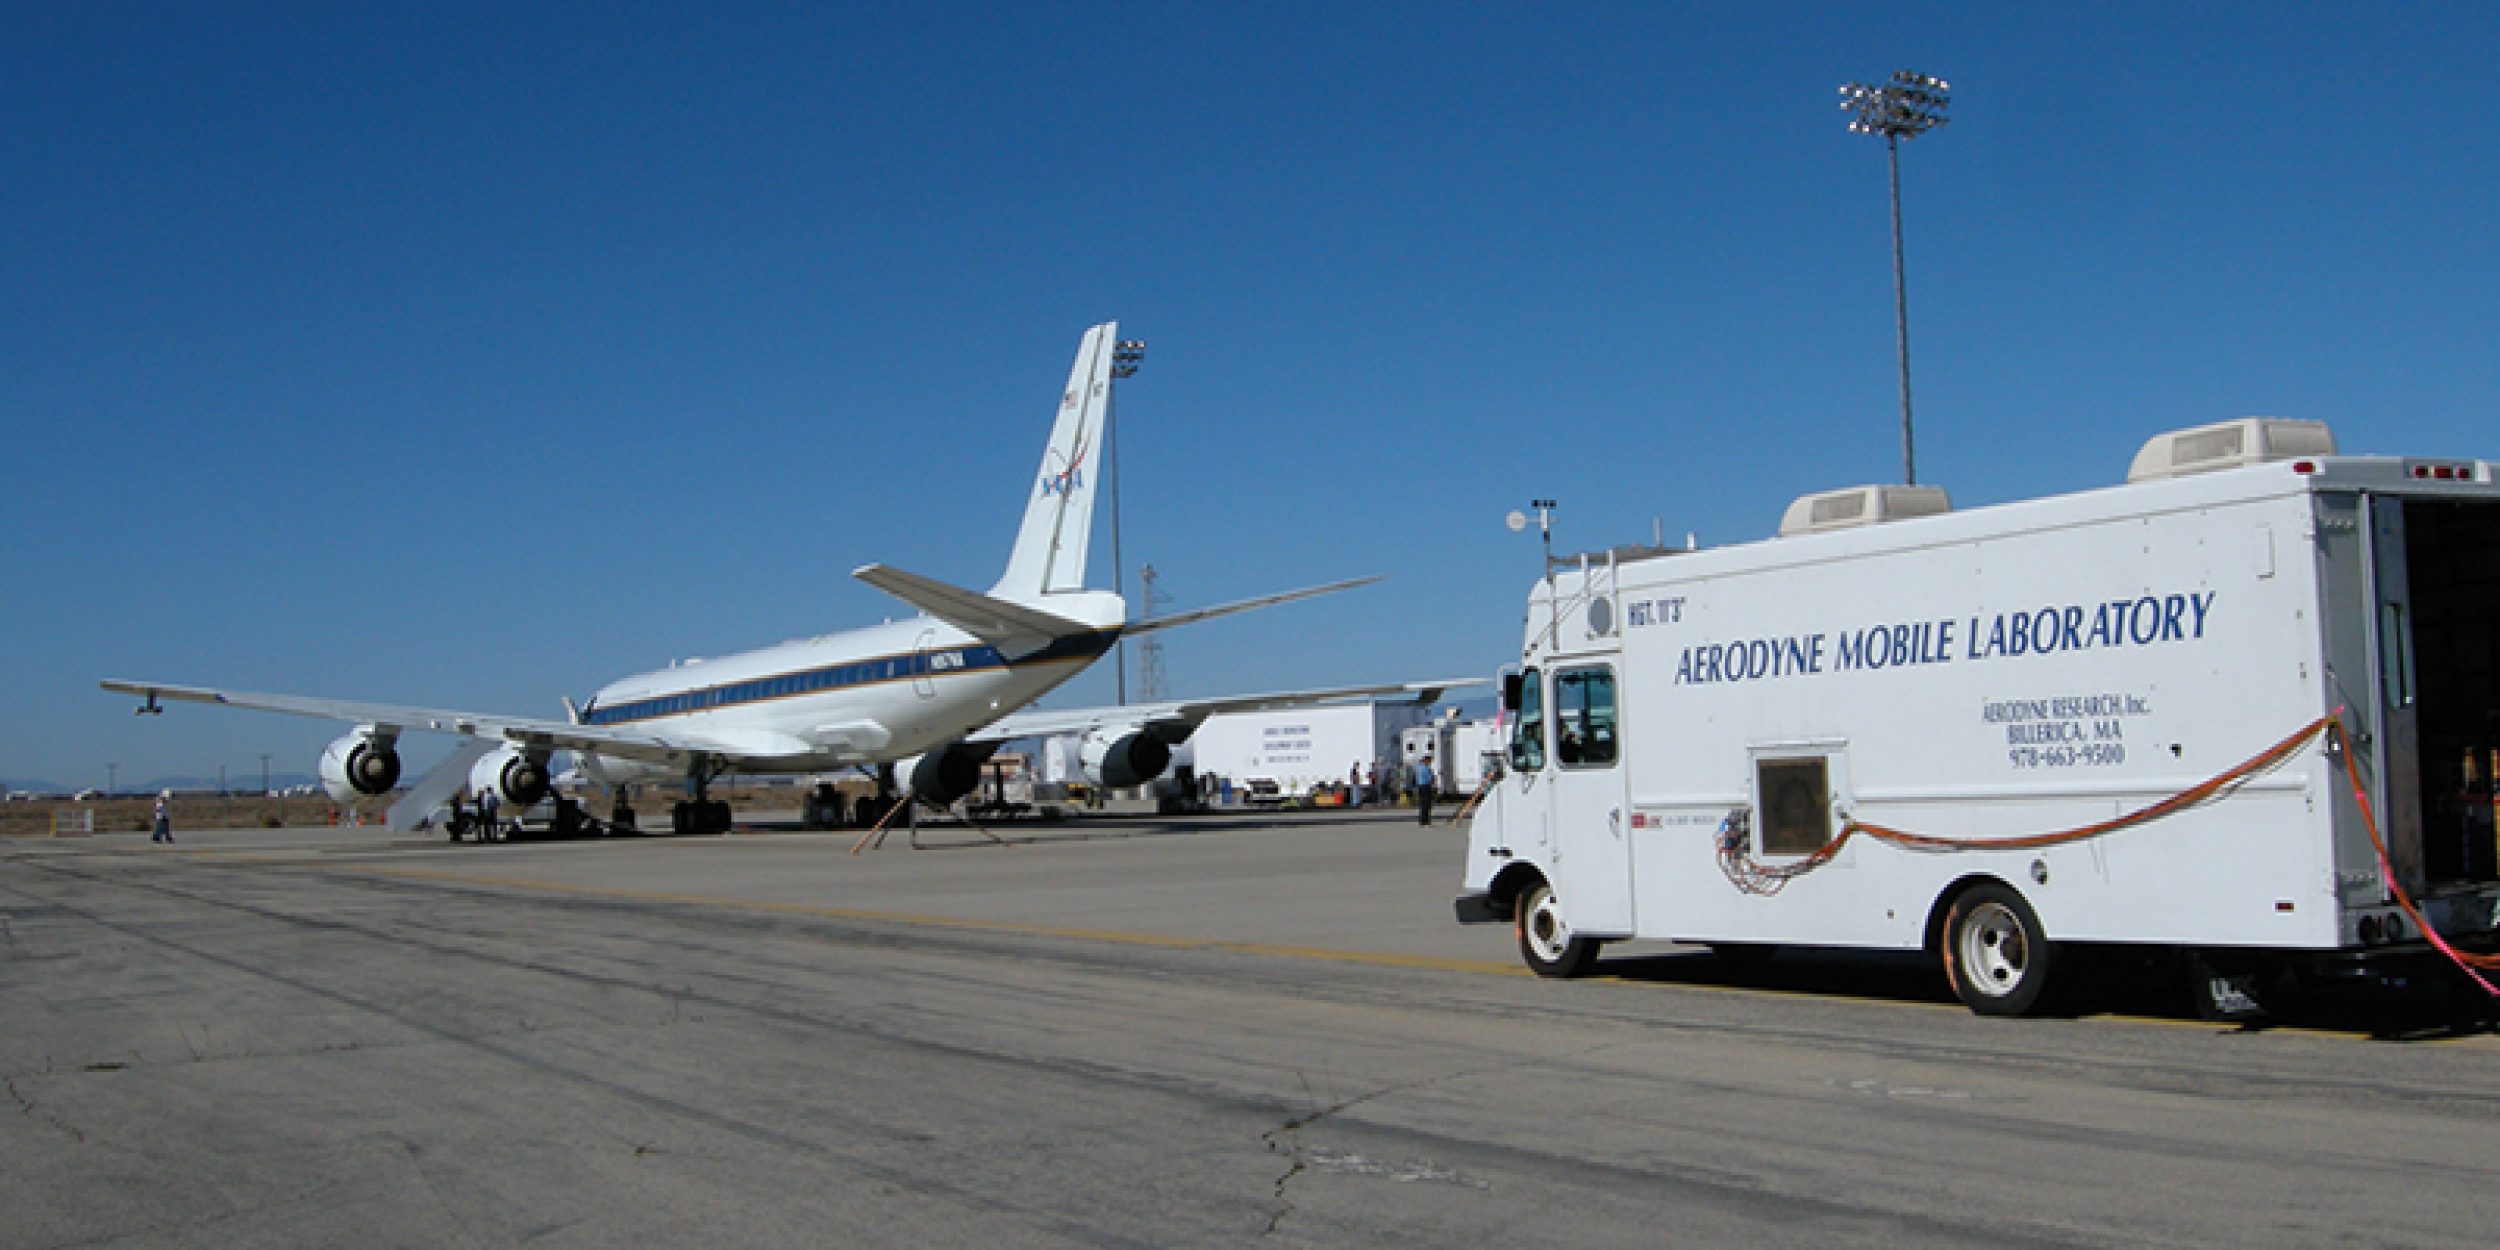 mobile laboratory van with airplane in background